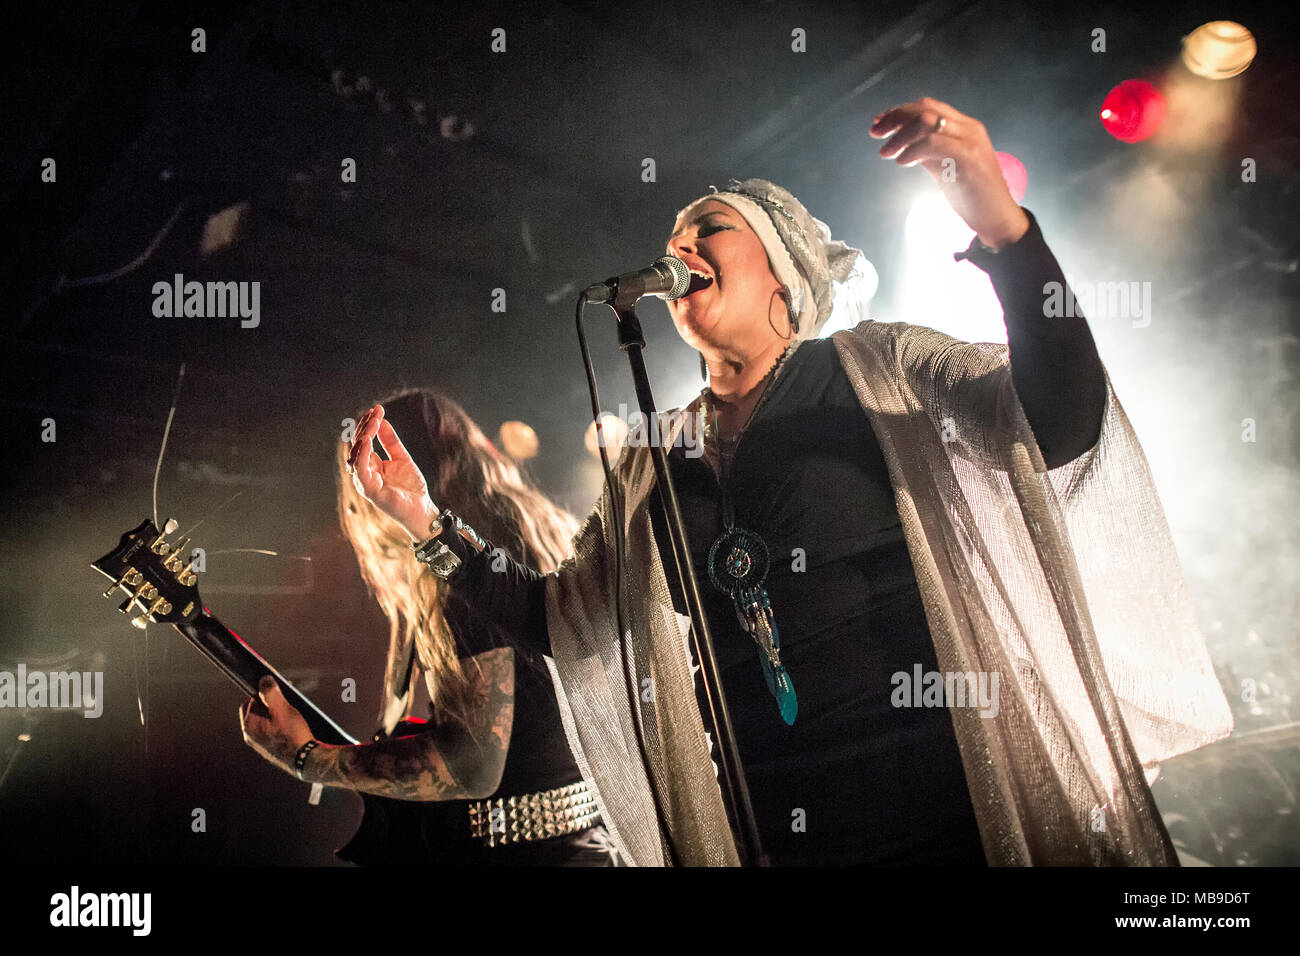 Norway, Oslo - March 30, 2018. The Portuguese heavy metal band Earth Electric performs a live concert at Rockefeller during the Norwegian metal festival Inferno Metal Festival 2018 in Oslo. Here vocalist Carmen Susana Simoes is seen live on stage. (Photo credit: Gonzales Photo - Terje Dokken). Stock Photo